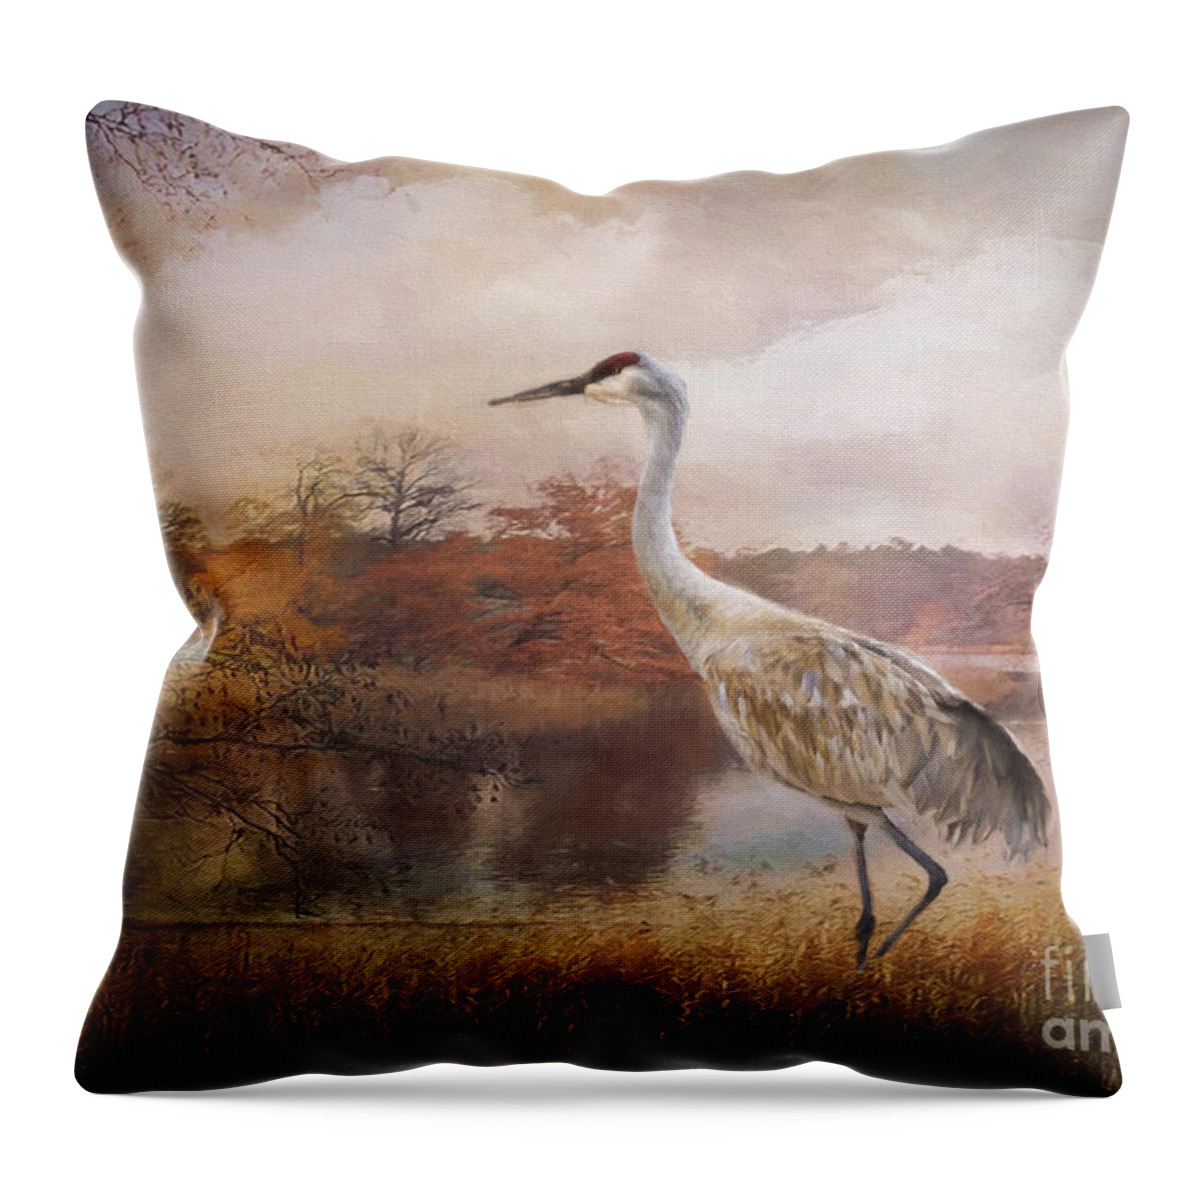 Crane Throw Pillow featuring the painting Autumn Lake Crane by Janice Pariza